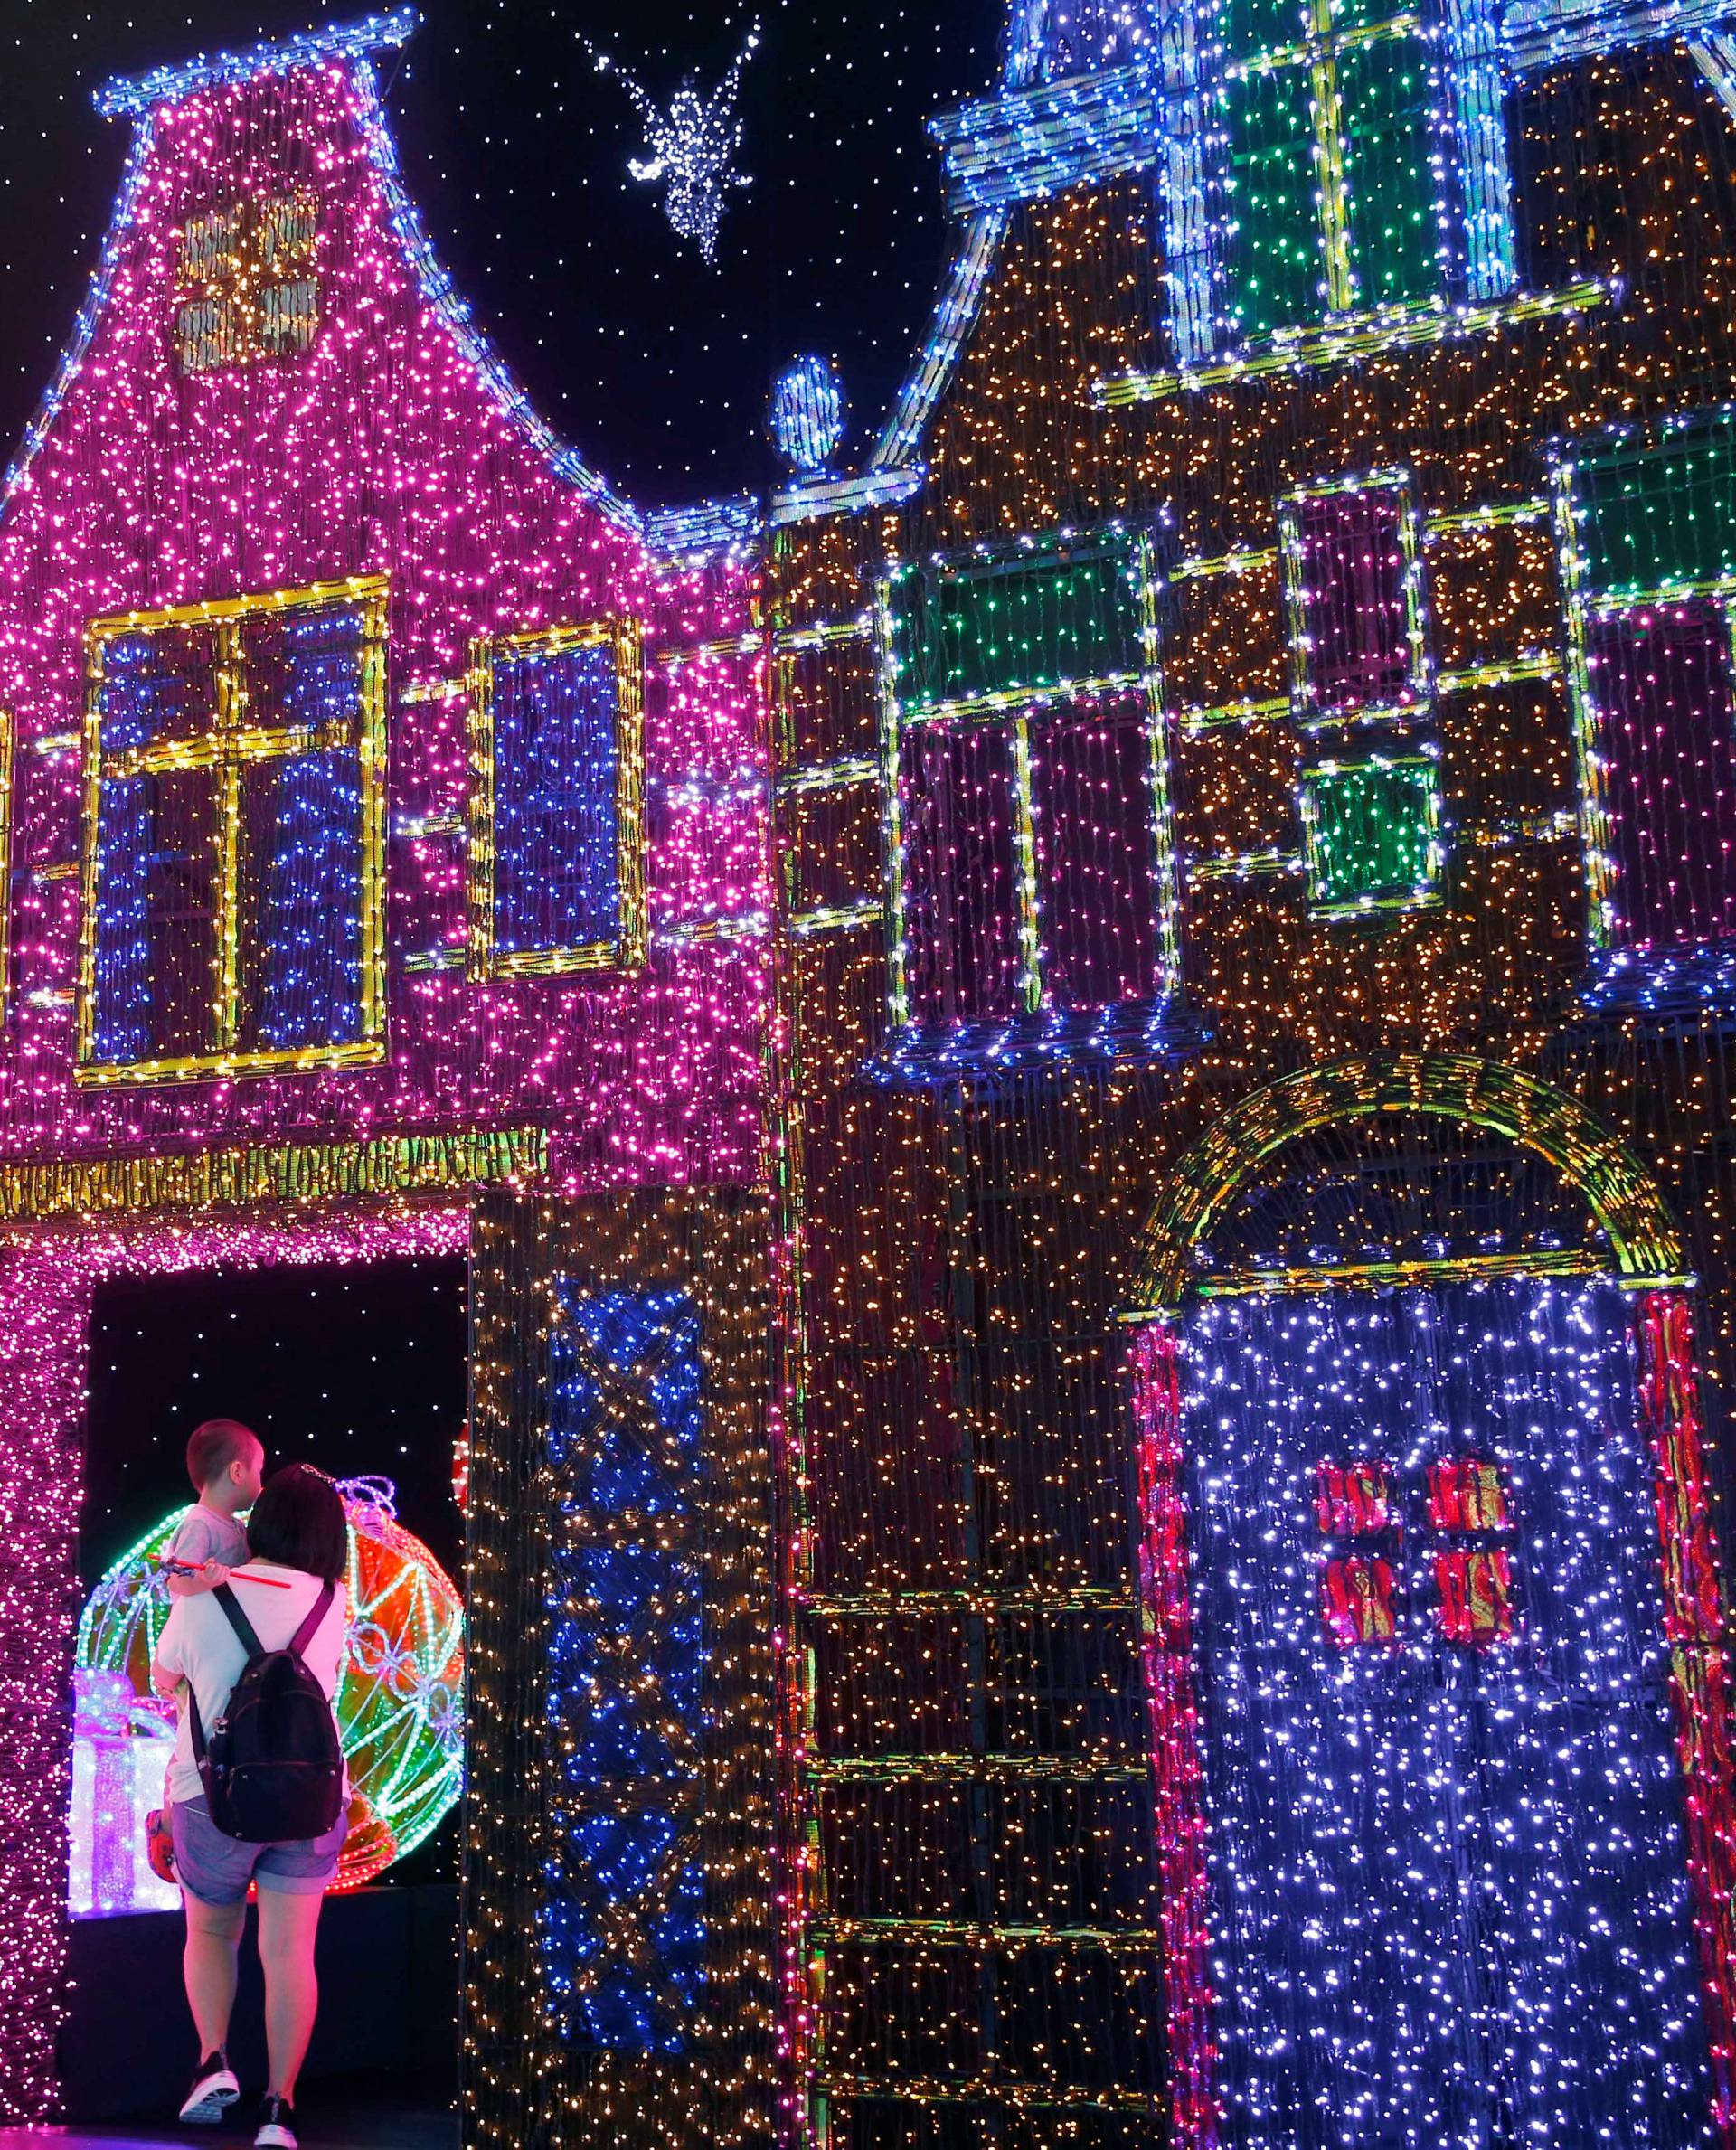 People tour a Christmas attraction featuring a display of more than 800,000 light bulbs in Universal Studios Singapore